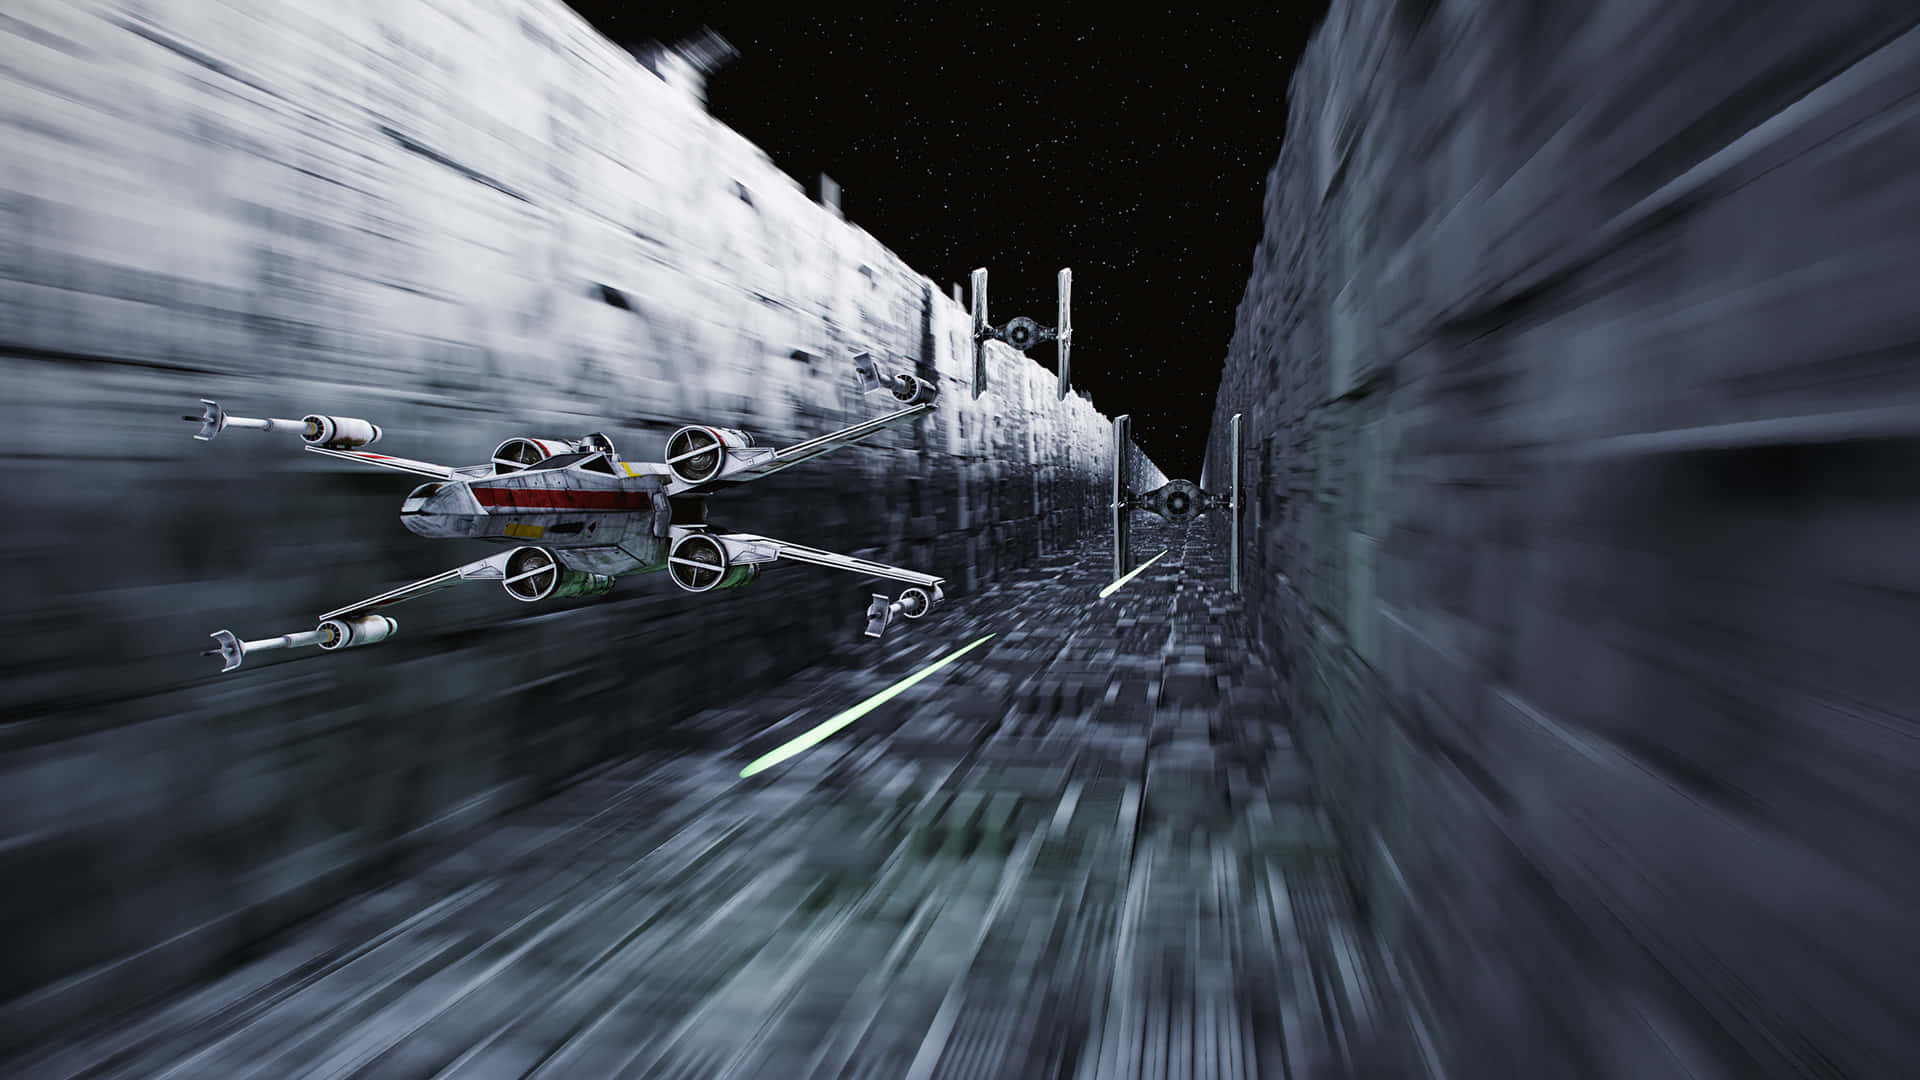 Experience the adrenaline rush of the Trench Run from the movie Star Wars Wallpaper